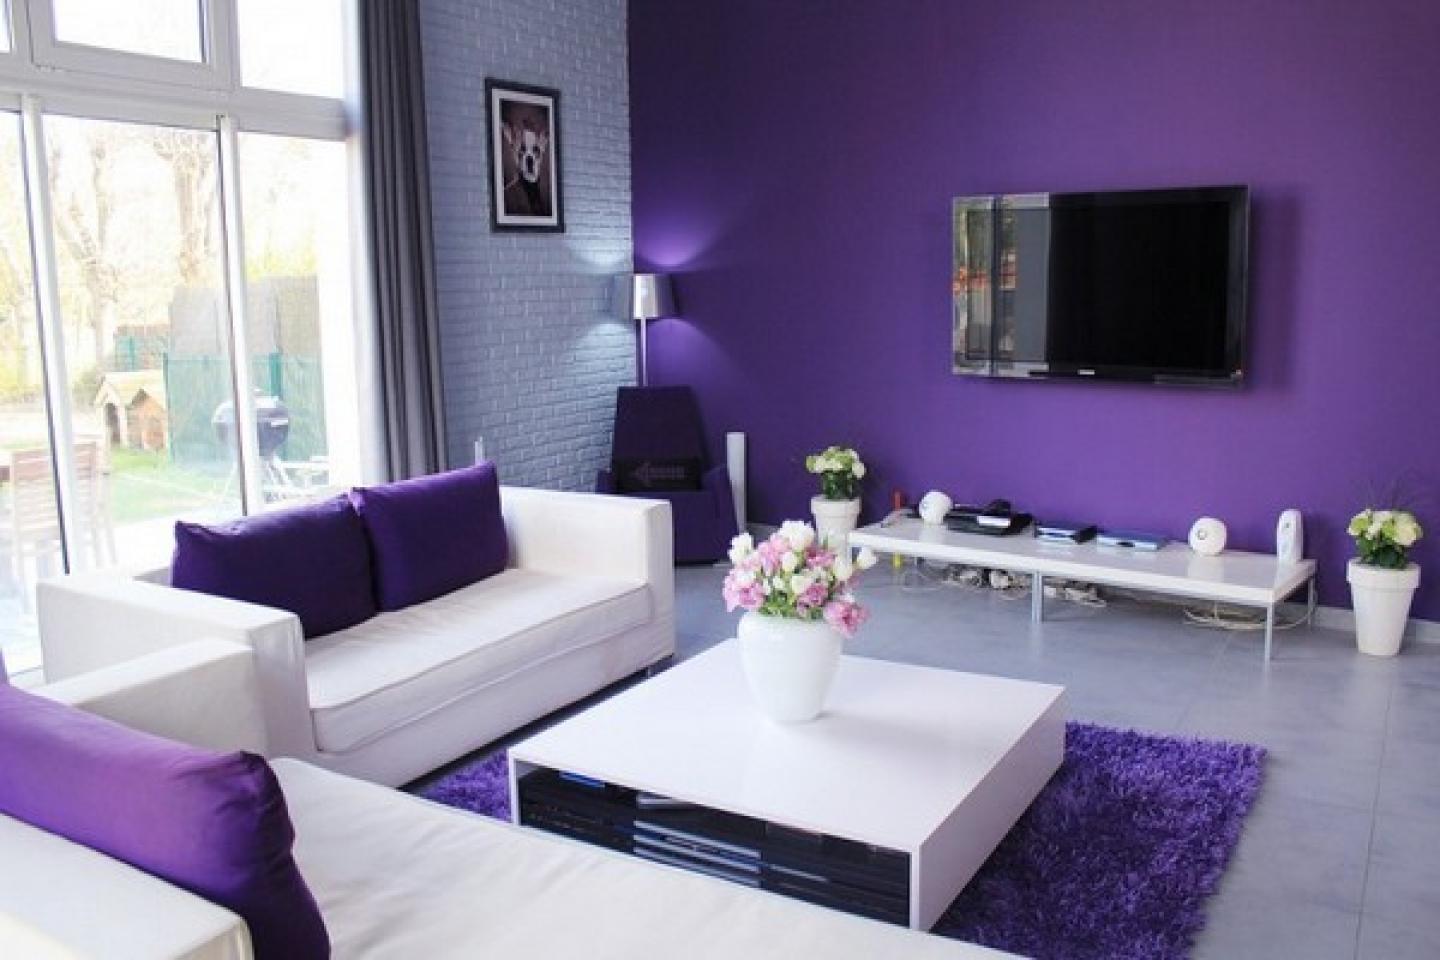 Find 91+ Impressive living room ideas purple Trend Of The Year